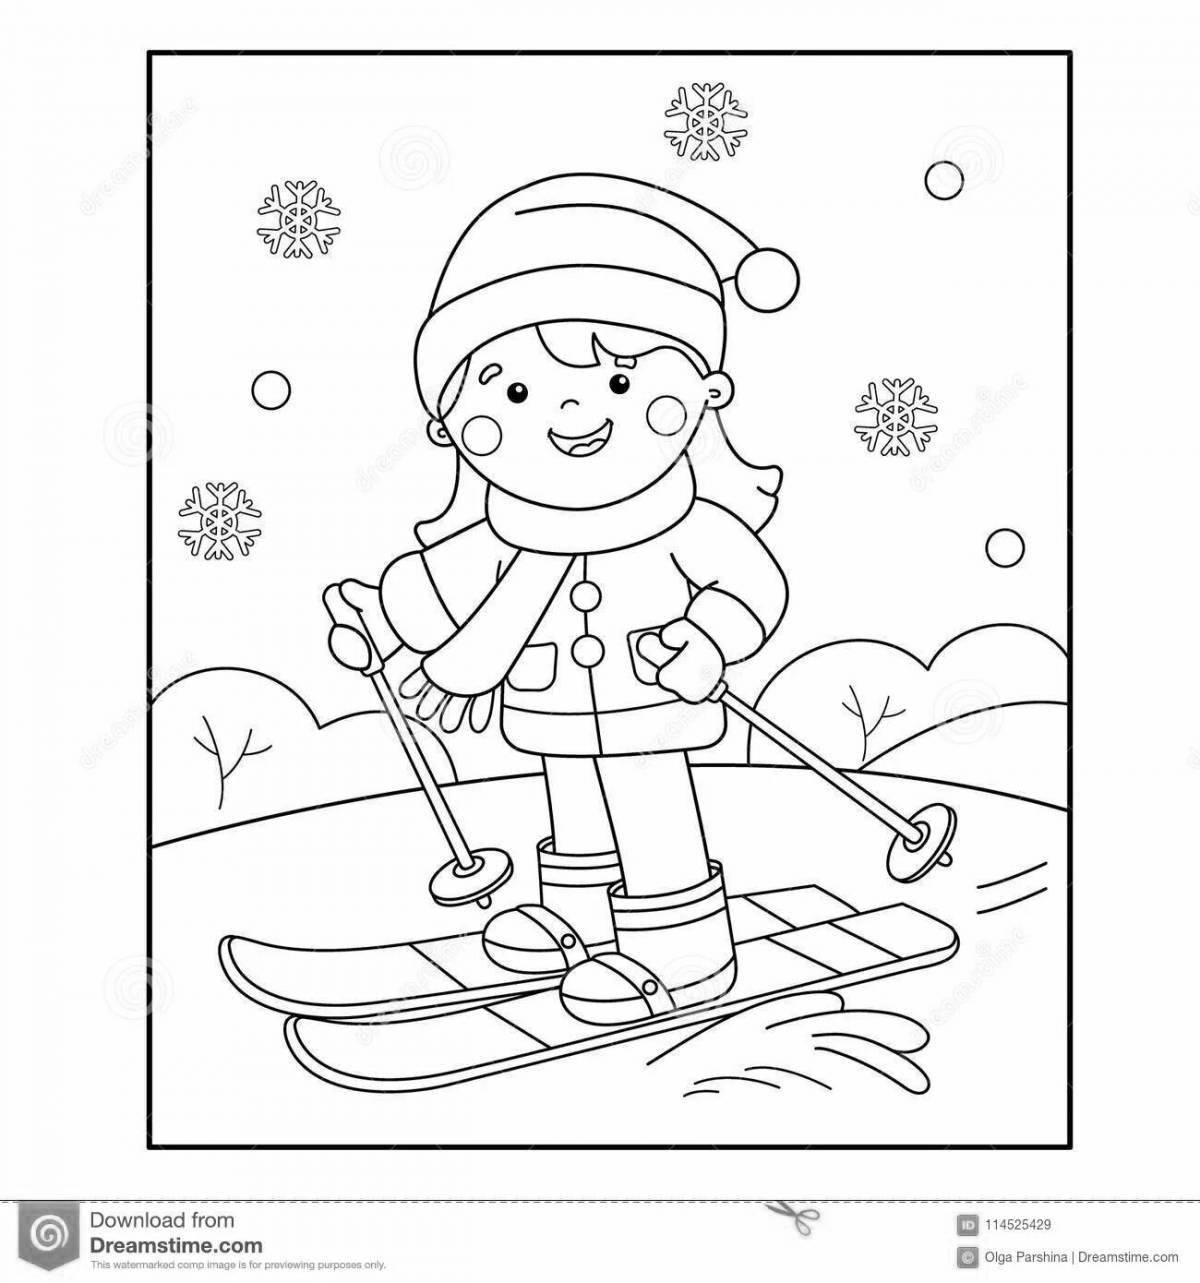 Color-frenzy junior group winter coloring